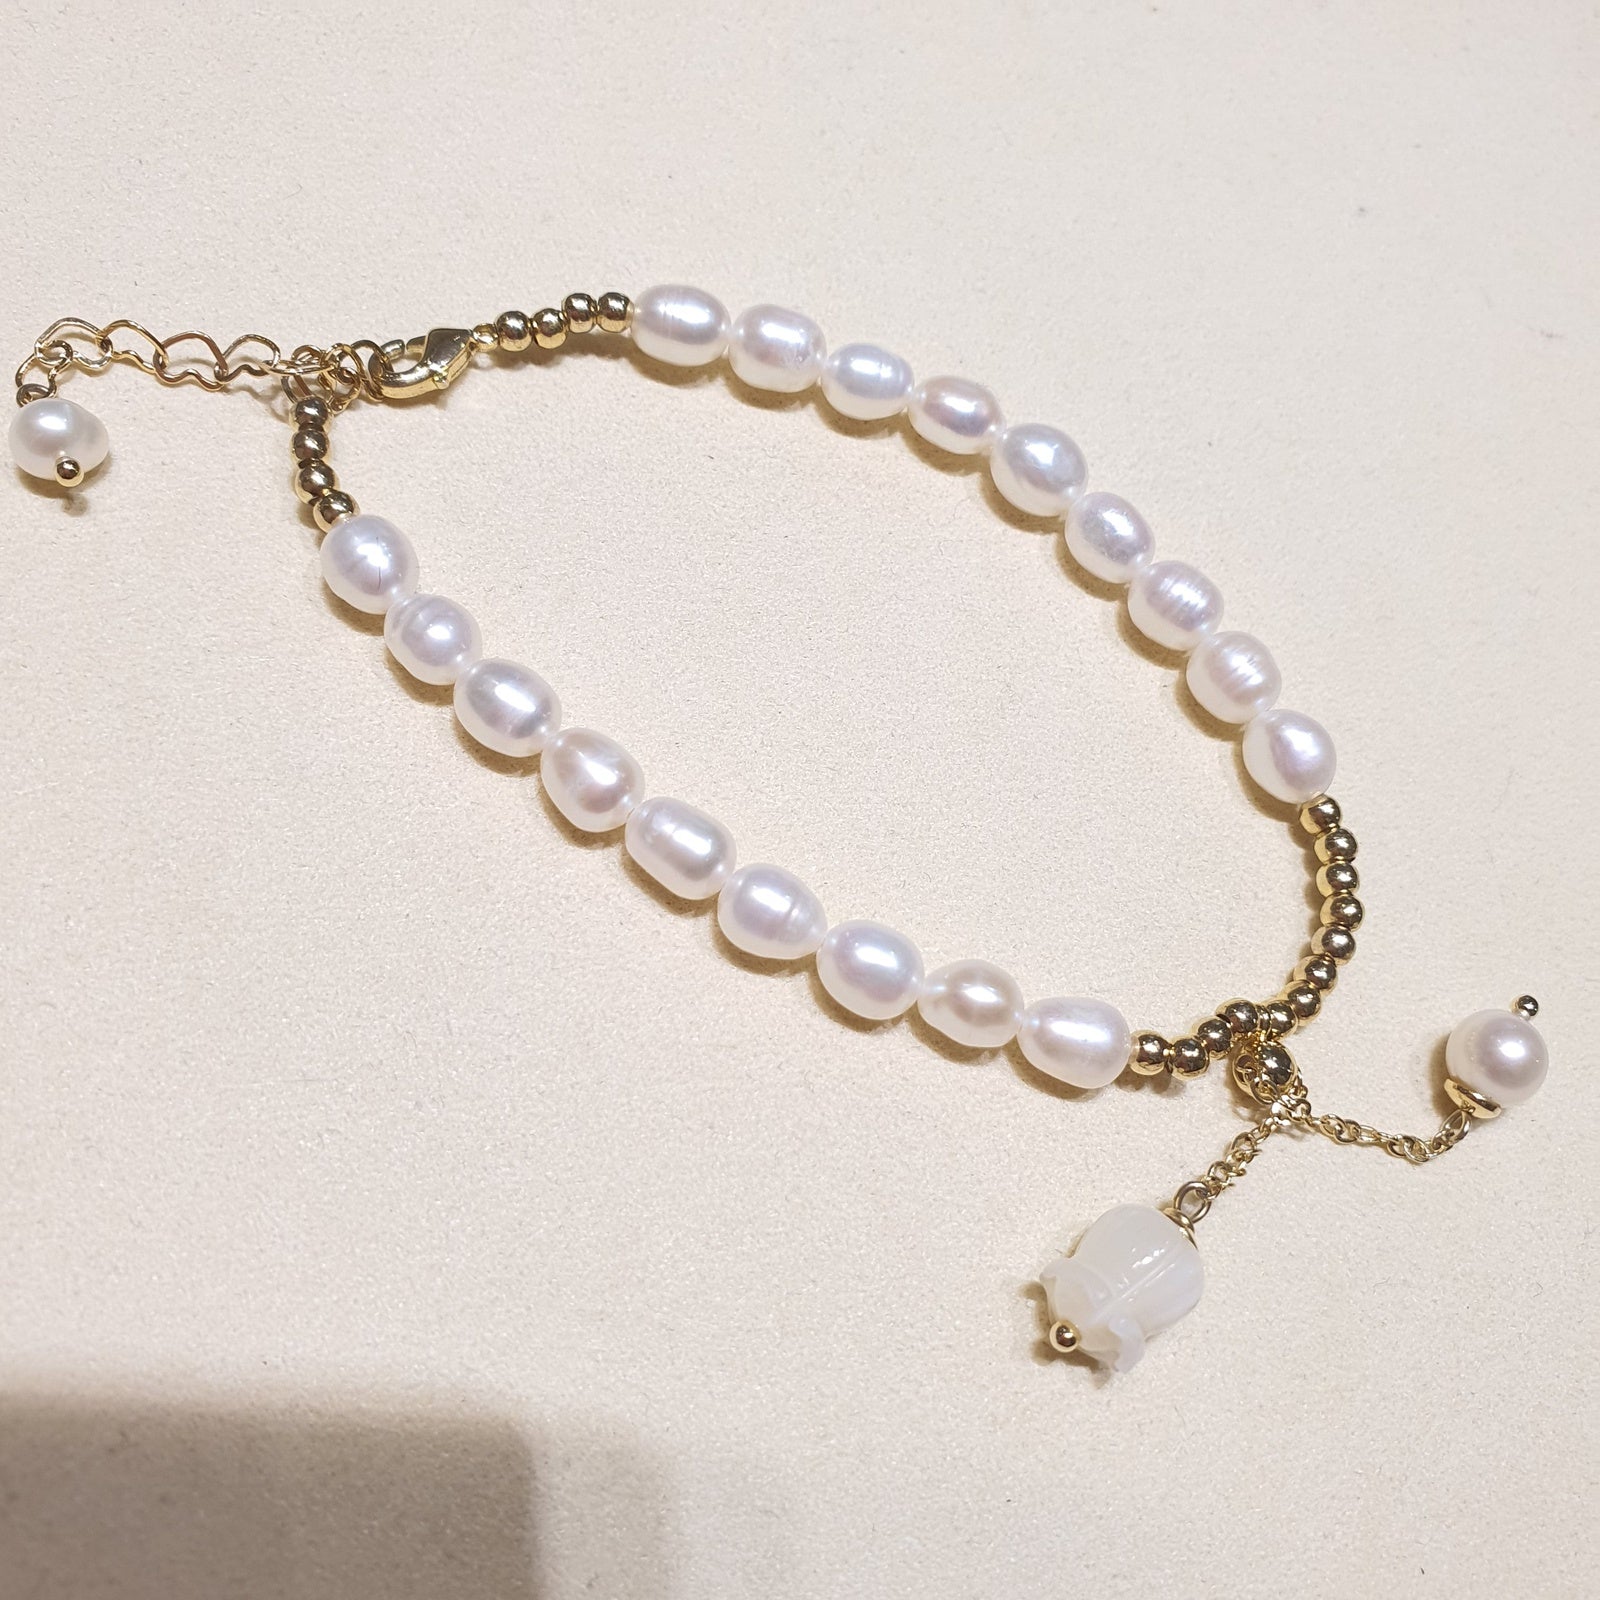 HandCraft Lilly of the Valley Shell Pearl Bracelet